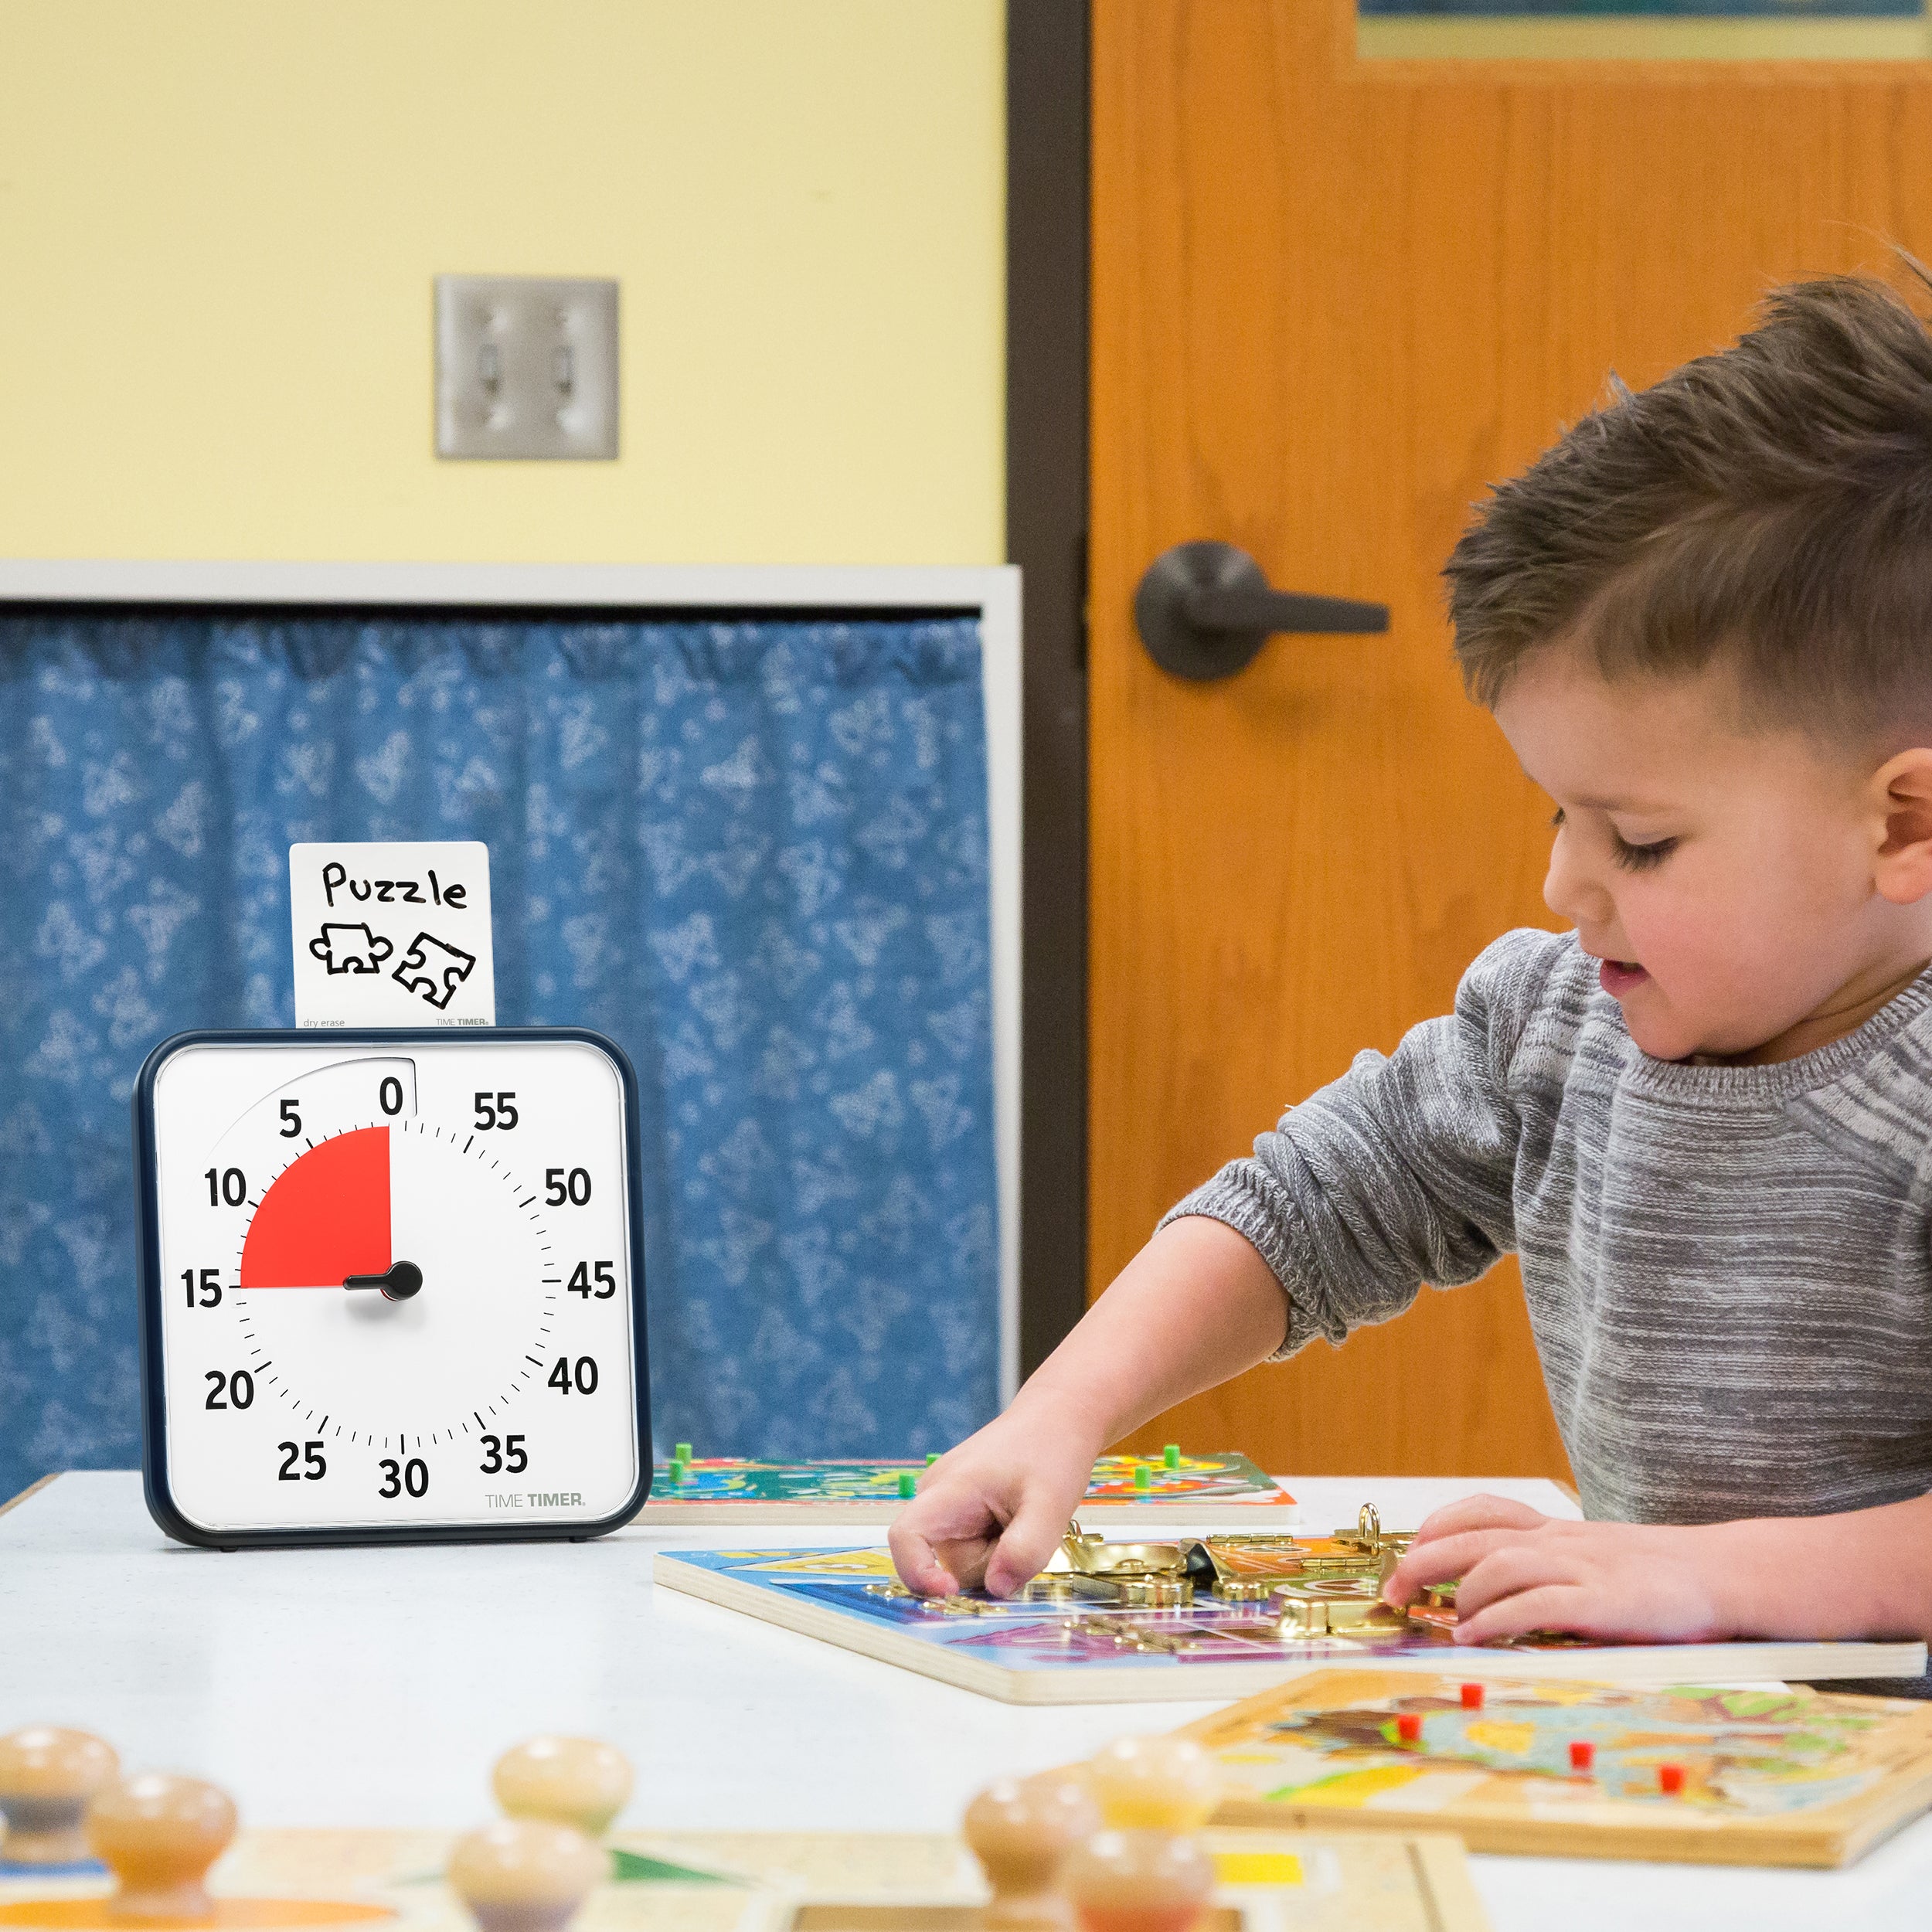 The Time Timer® Original 8” is shown on a tabletop in the classroom. A young child of preschool age is playing with puzzles. The visual timer has a red disk set to 15 minutes. In the top of the timer, the Dry Erase Card accessory is shown with the word "Puzzle" written on it and a drawing of two puzzle pieces. 